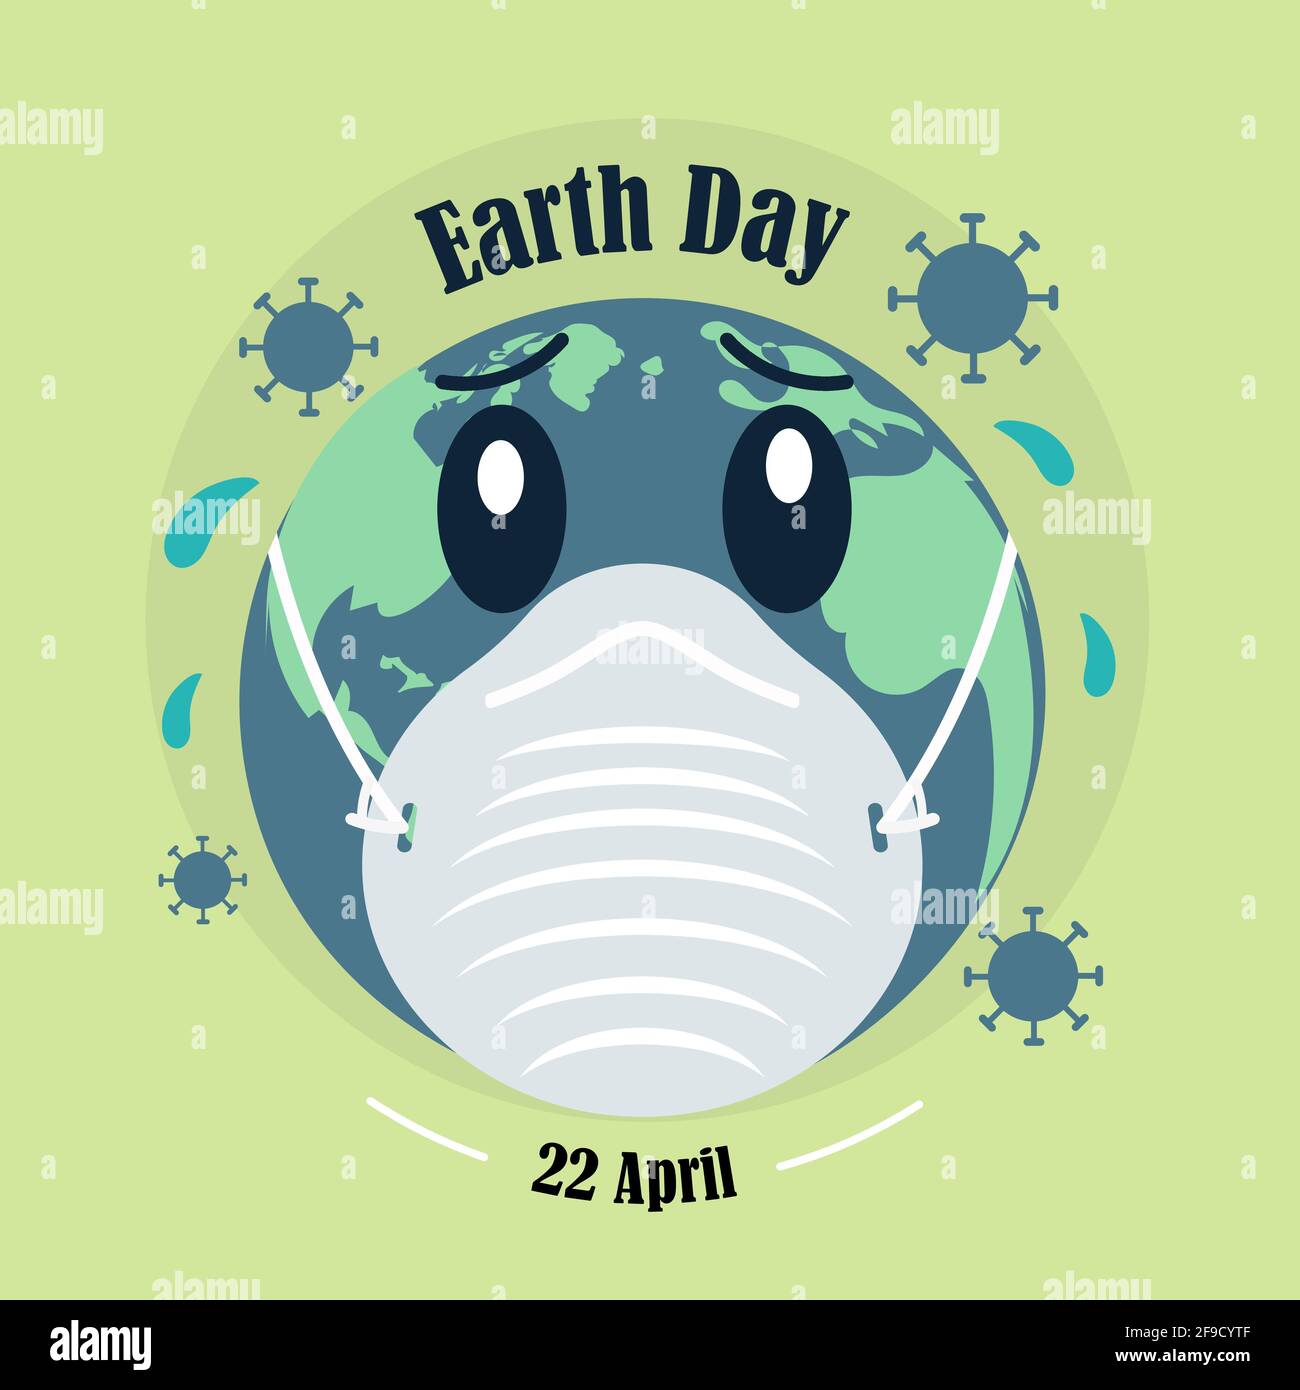 Earth Day, corona virus pandemic poster, 22 April, Earth in mask, save earth, pollution illustration vector banner Stock Vector